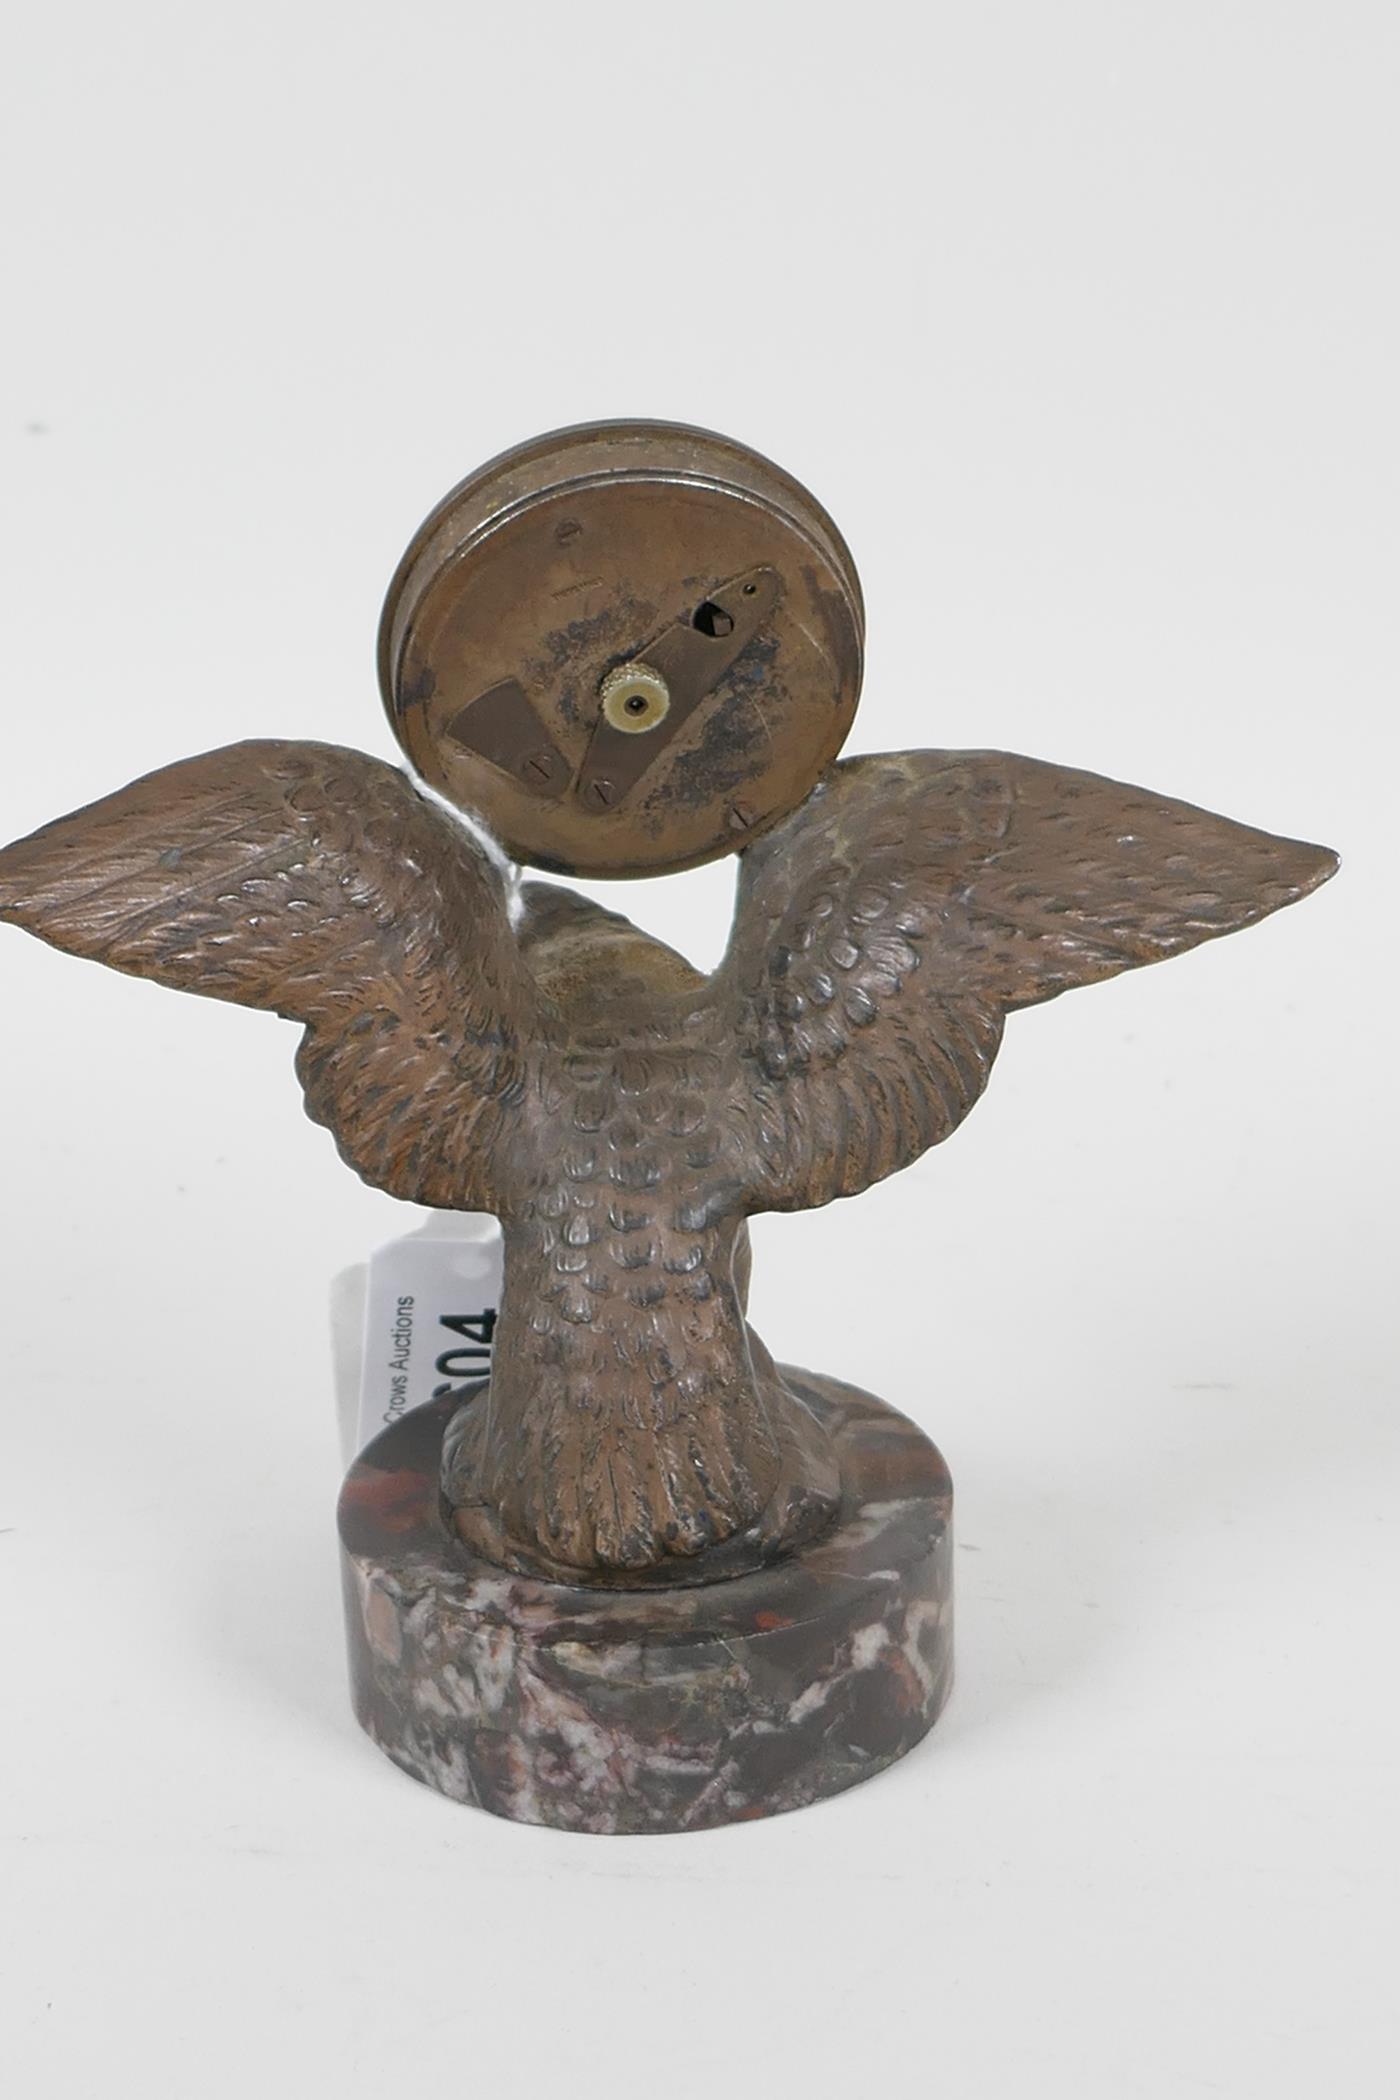 A desk clock cast as an eagle with spread wings, mounted on a marble plinth, 5" high - Image 4 of 4